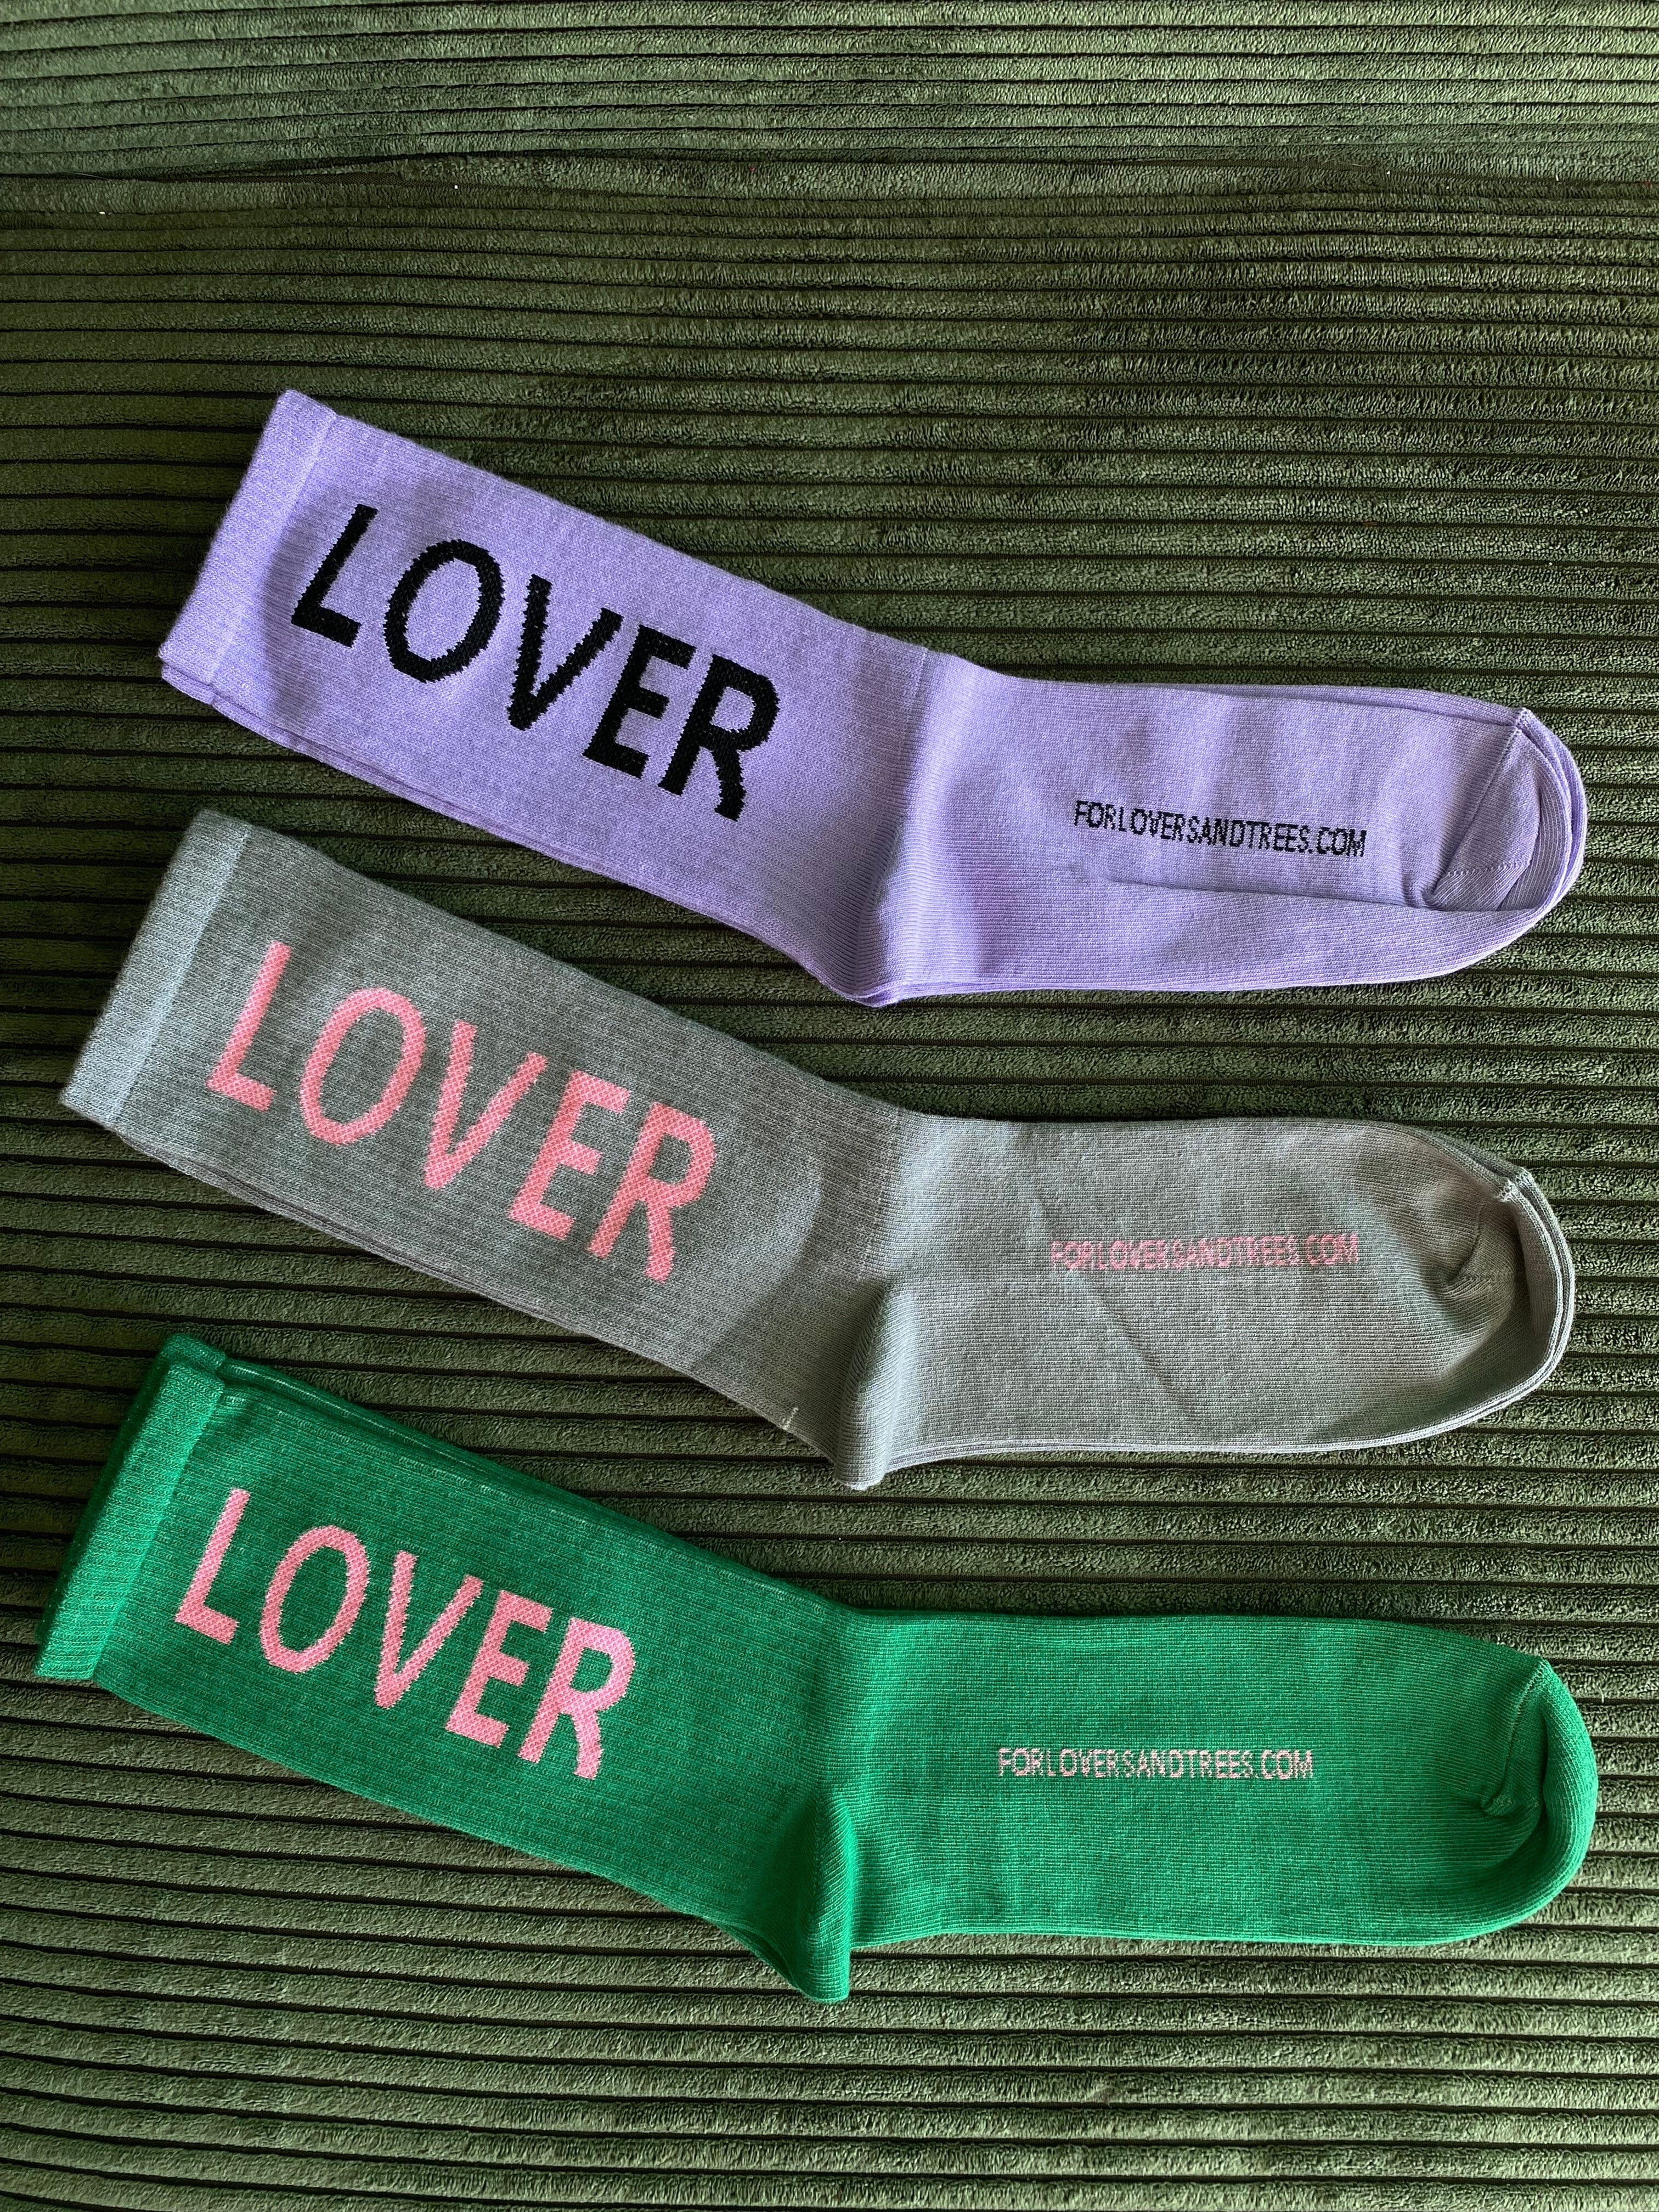 LIMITED LOVER COTTON SOCKS SET for lovers and trees 